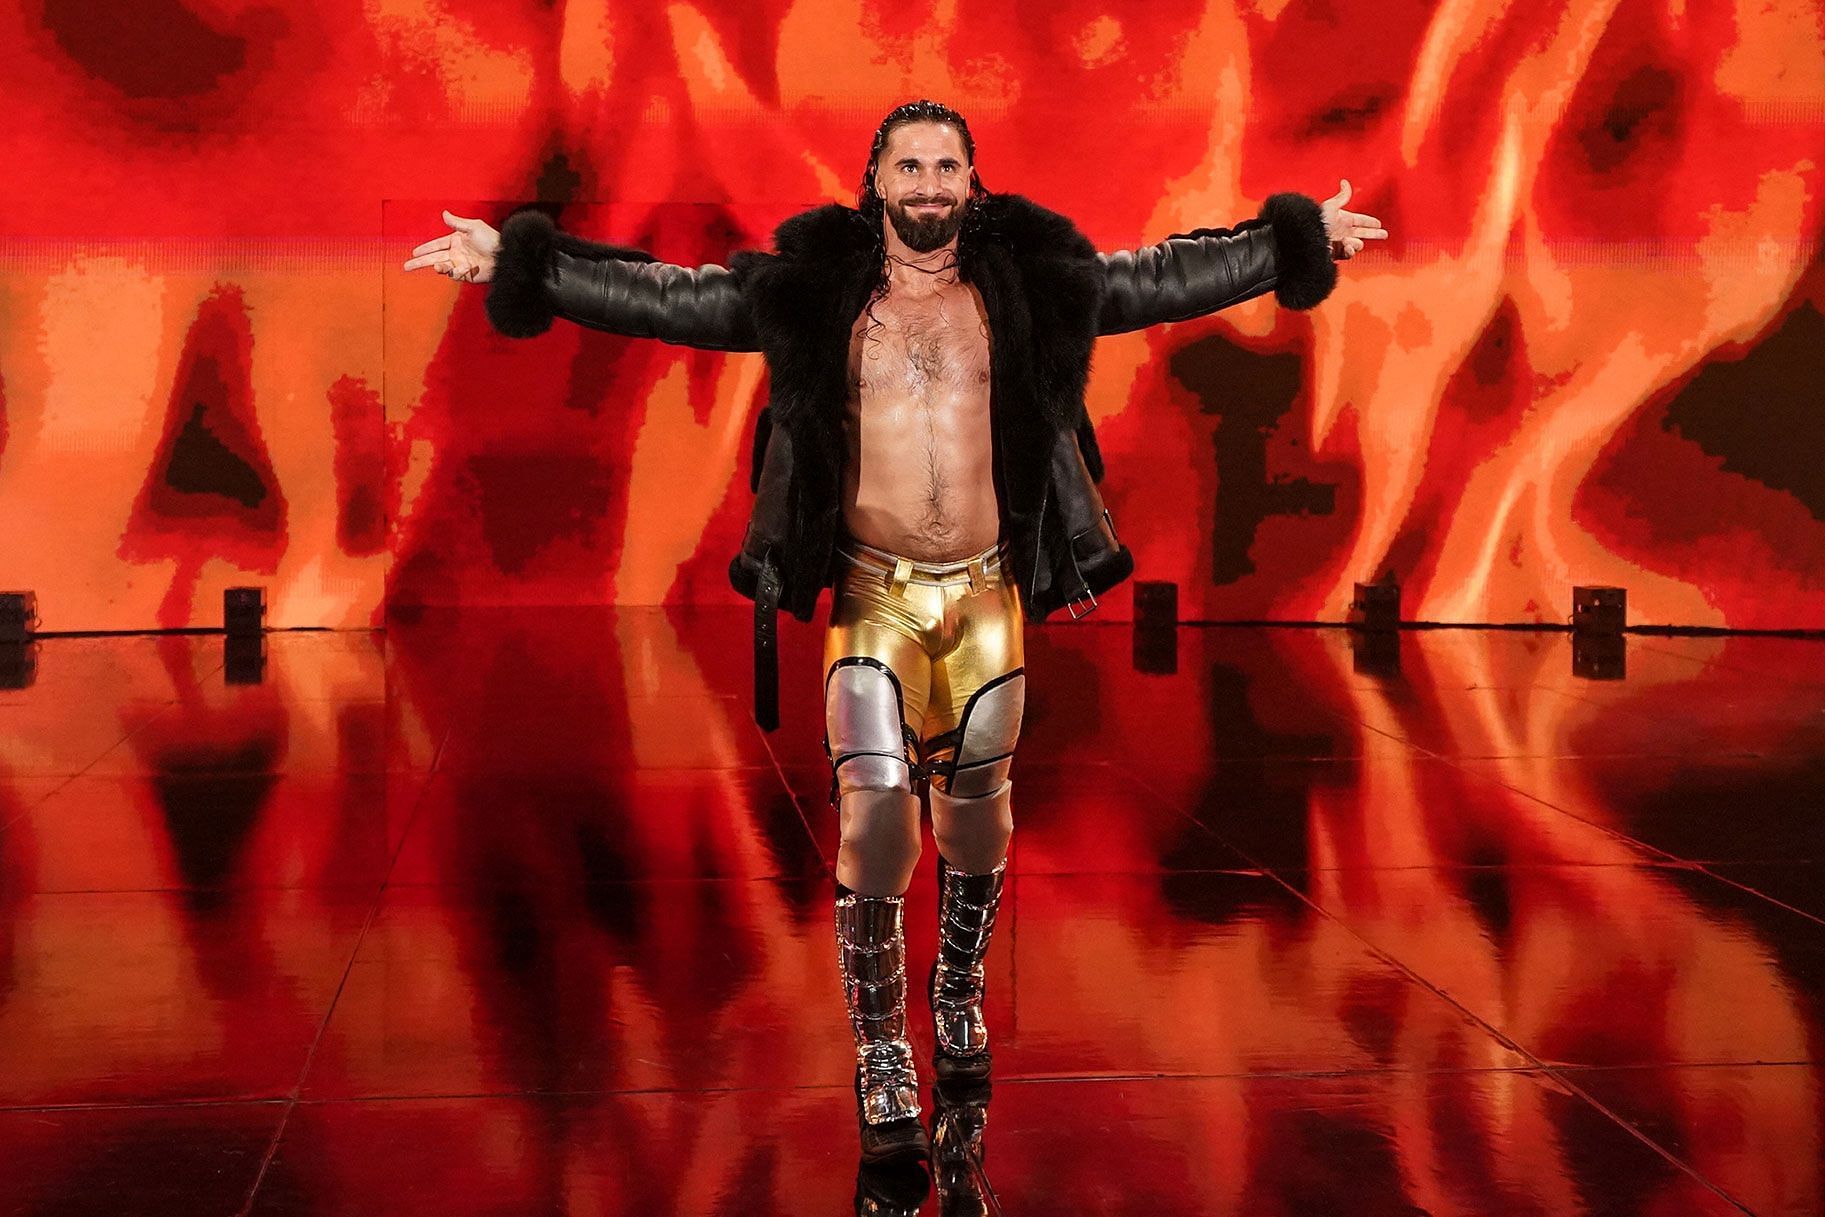 Seth Rollins has been signed to WWE for more than a decade since the early days of The Shield, alongside Roman Reigns &amp; Dean Ambrose (Jon Moxley).